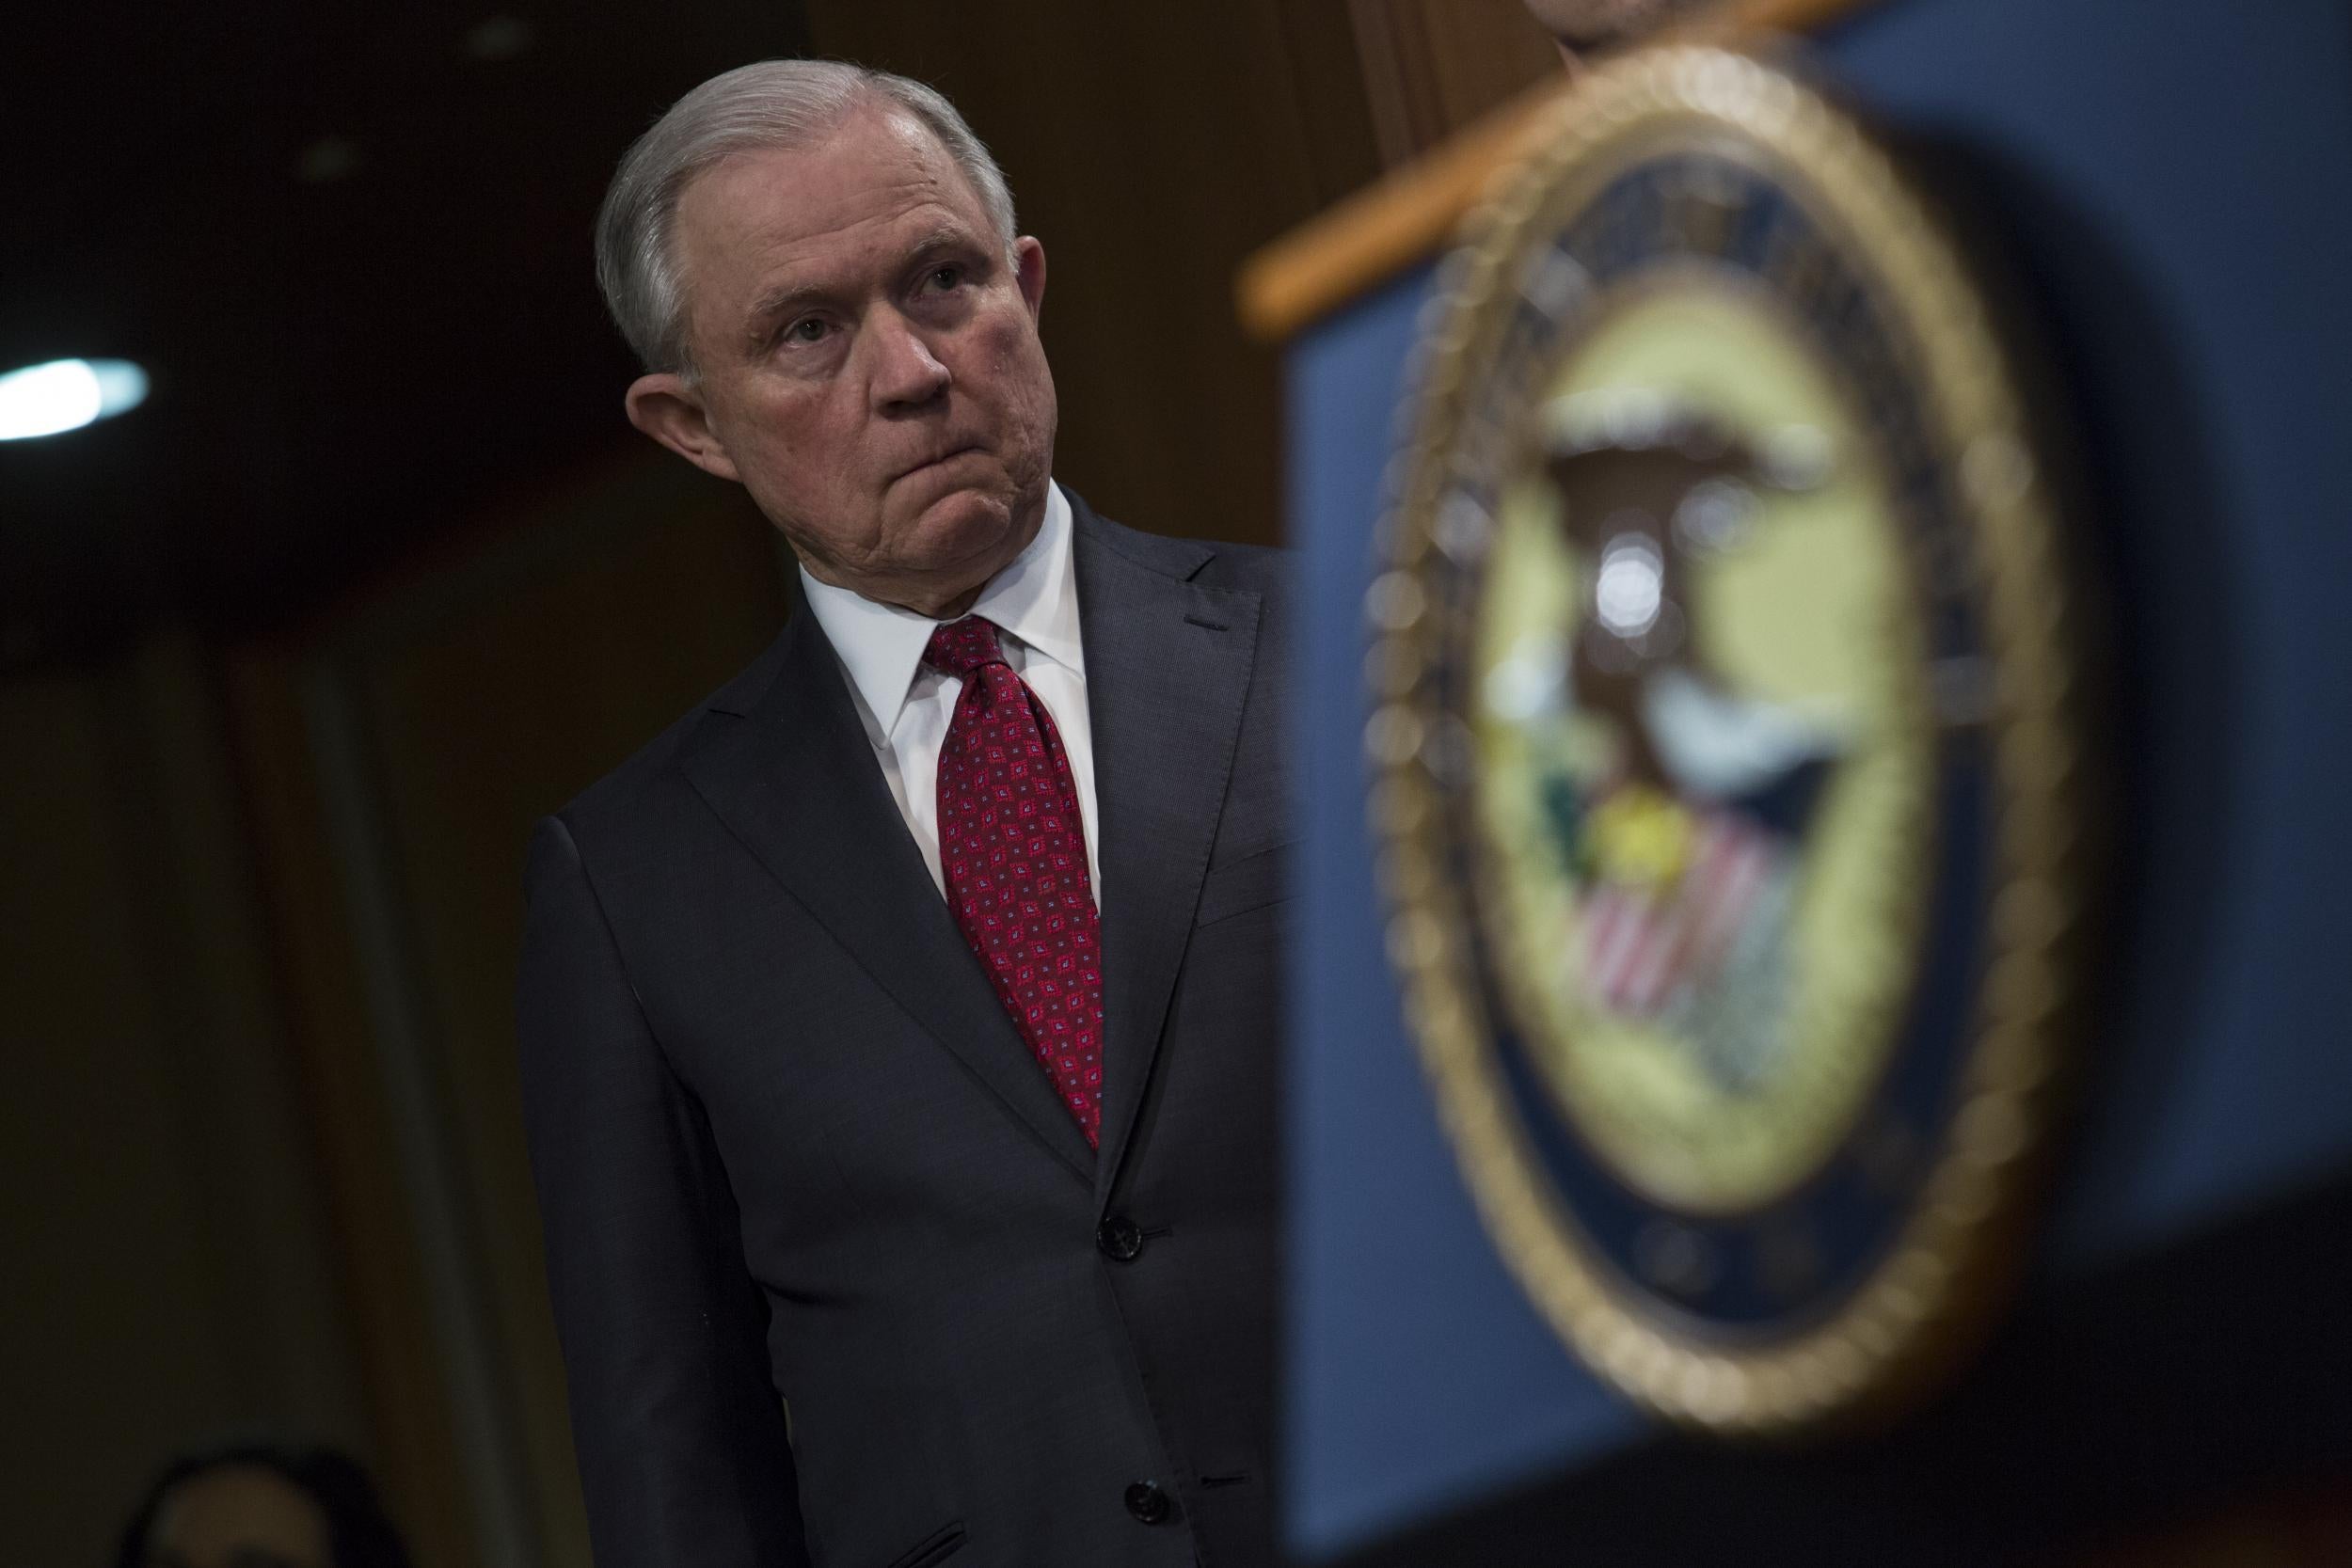 Attorney General Jeff Sessions listens during a press conference at the Department of Justice in Washington, DC